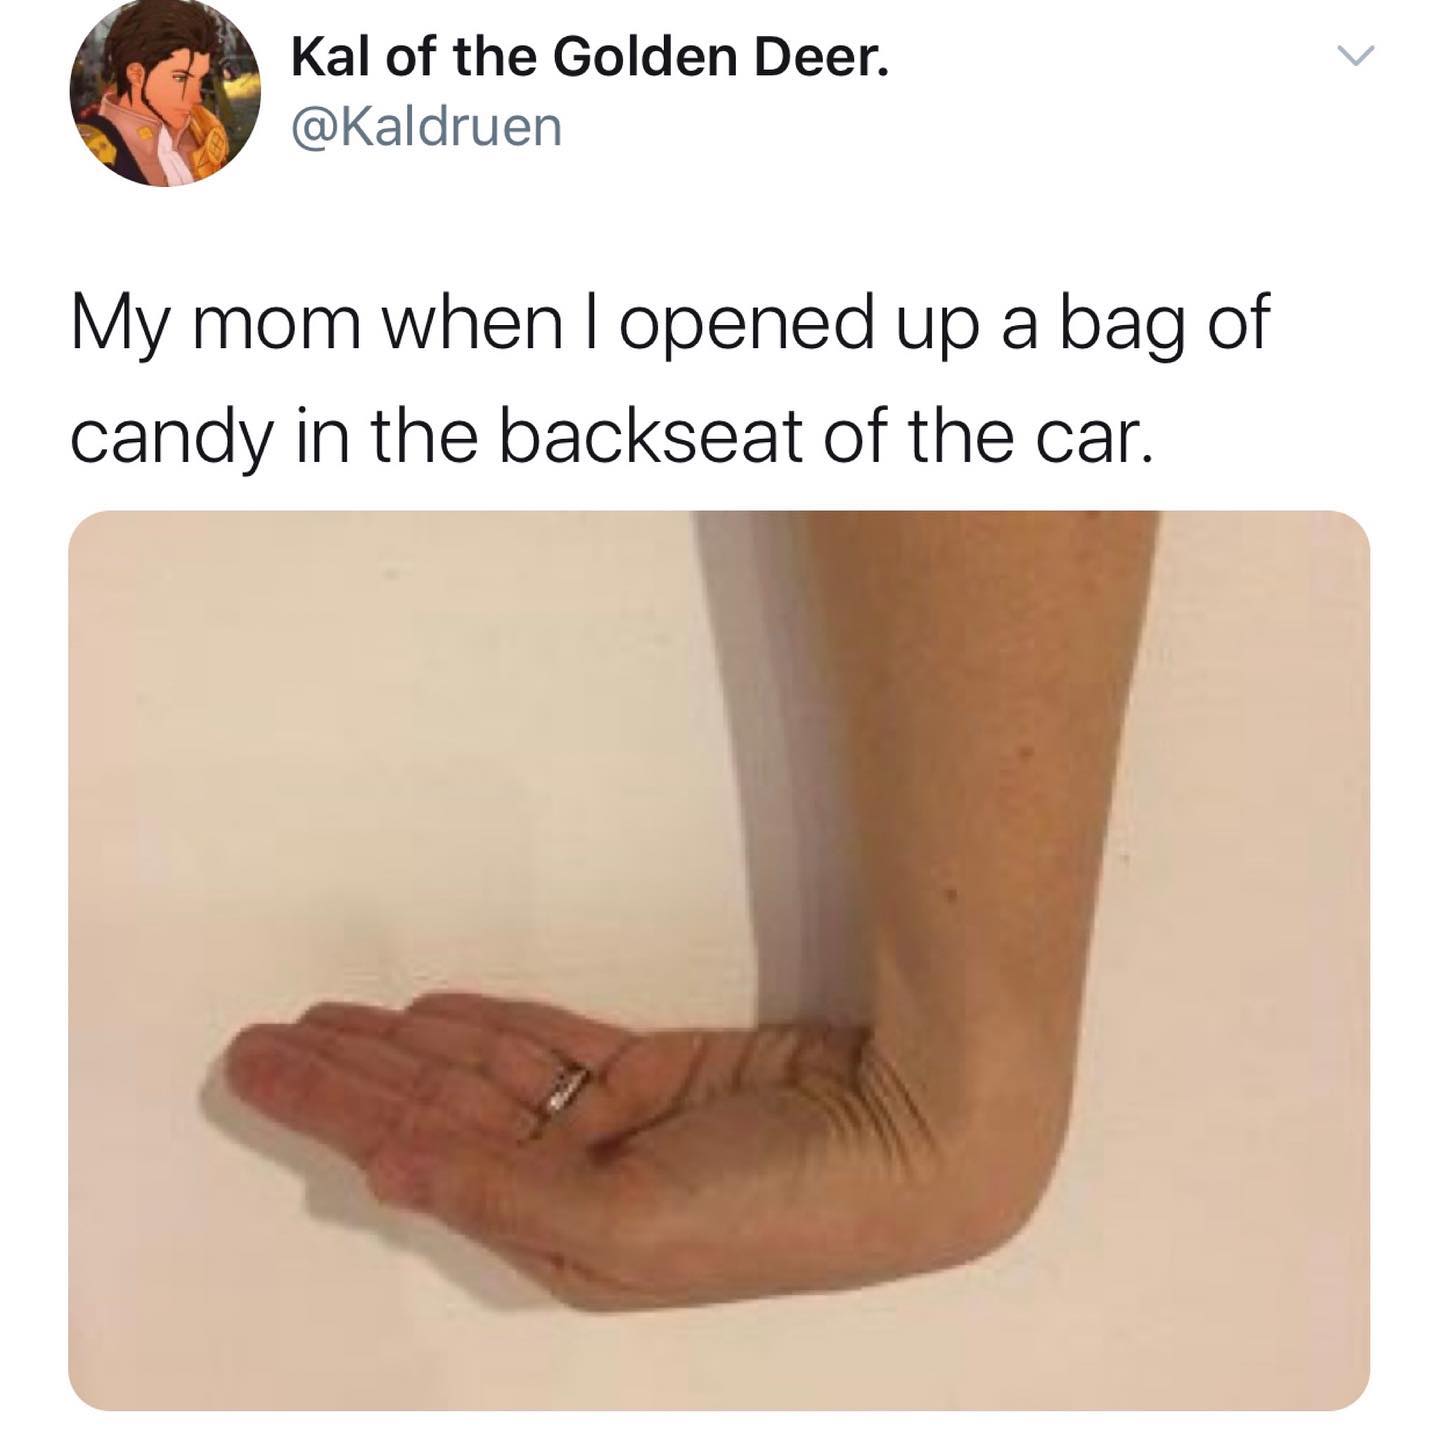 dank memes - twitter - backseat opening a bag of candy - Kal of the Golden Deer. My mom when I opened up a bag of candy in the backseat of the car.